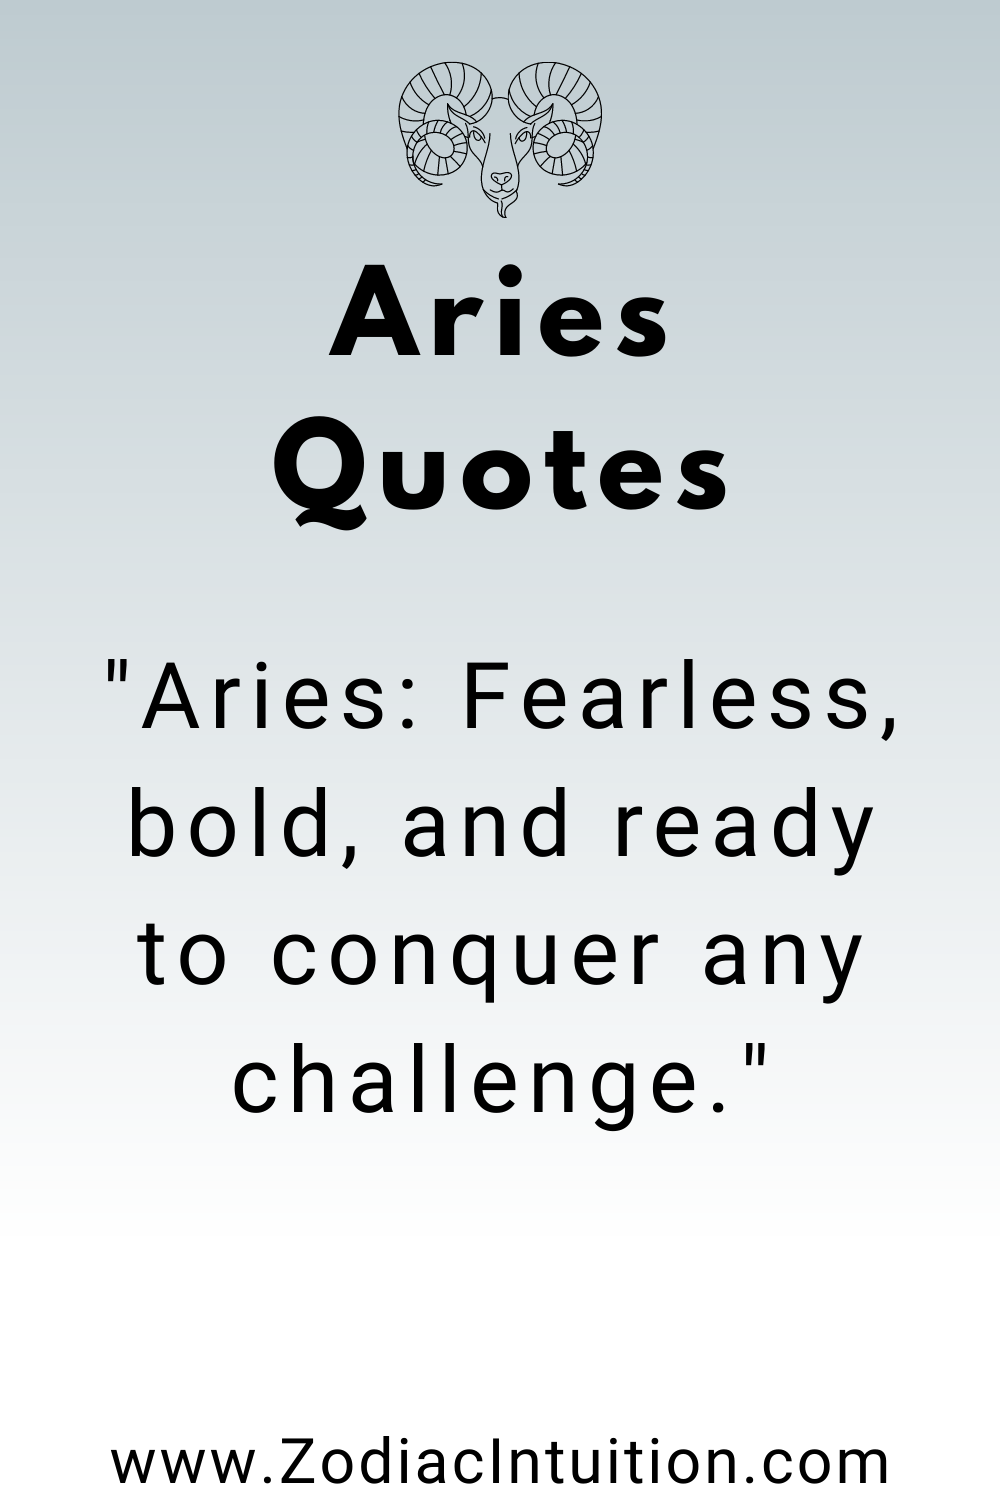 Top 5 Aries Quotes And Inspiration